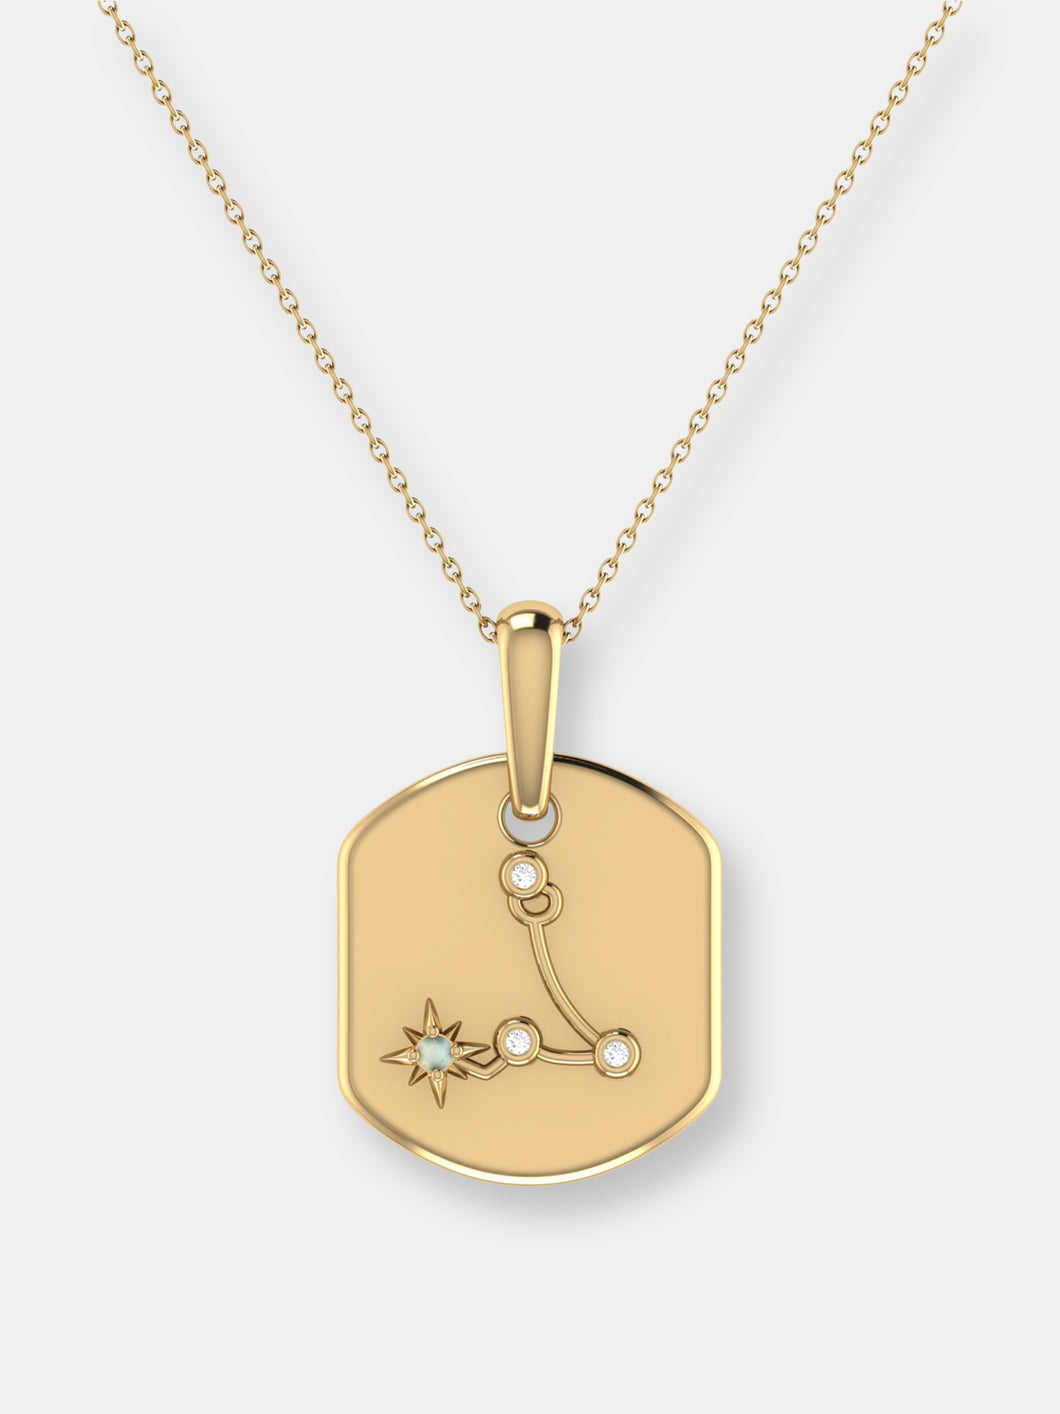 Pisces Two Fish Aquamarine & Diamond Constellation Tag Pendant Necklace In 14K Yellow Gold Vermeil On Sterling Silver